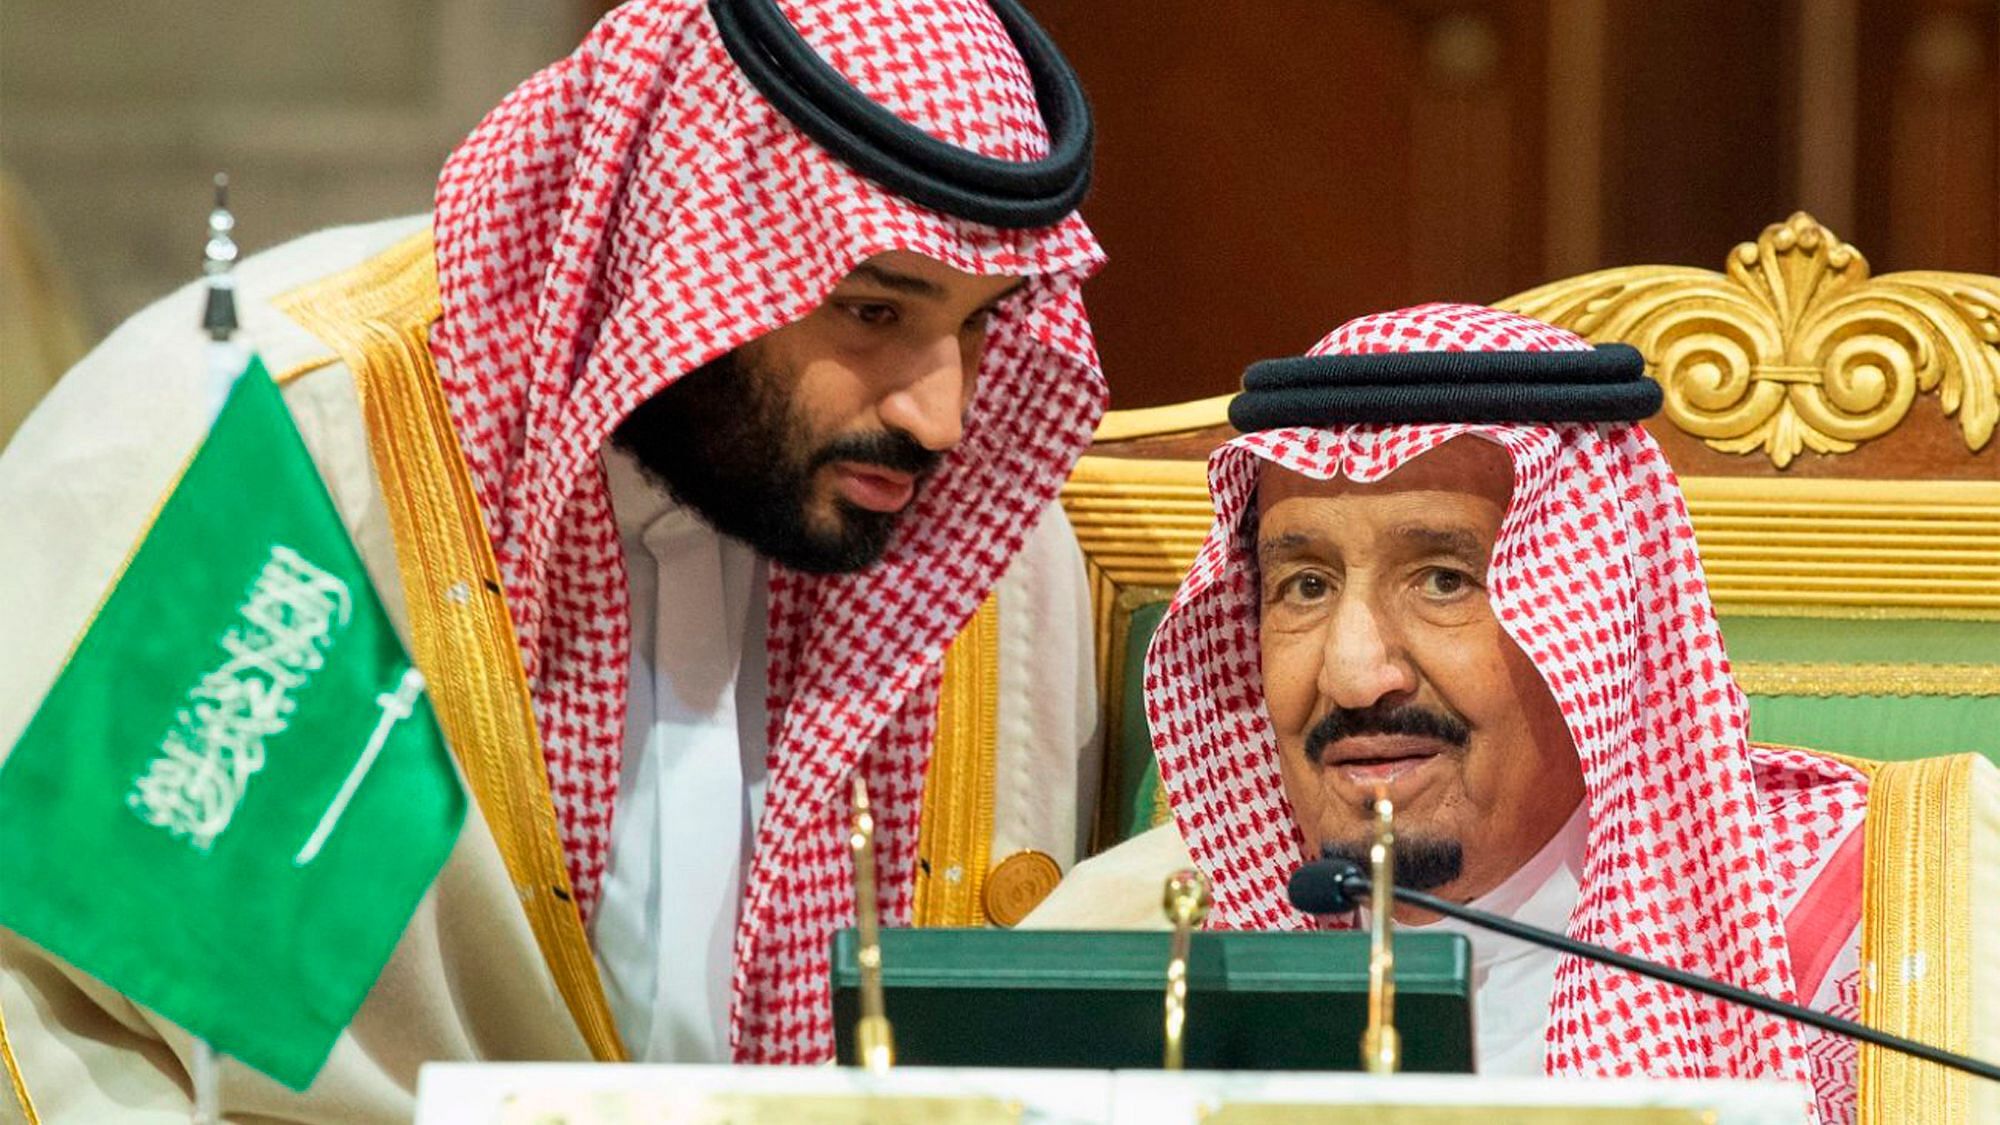 Saudi Crown Prince Mohammed bin Salman (left) speaks to his father, King Salman,  at a meeting of the Gulf Cooperation Council.